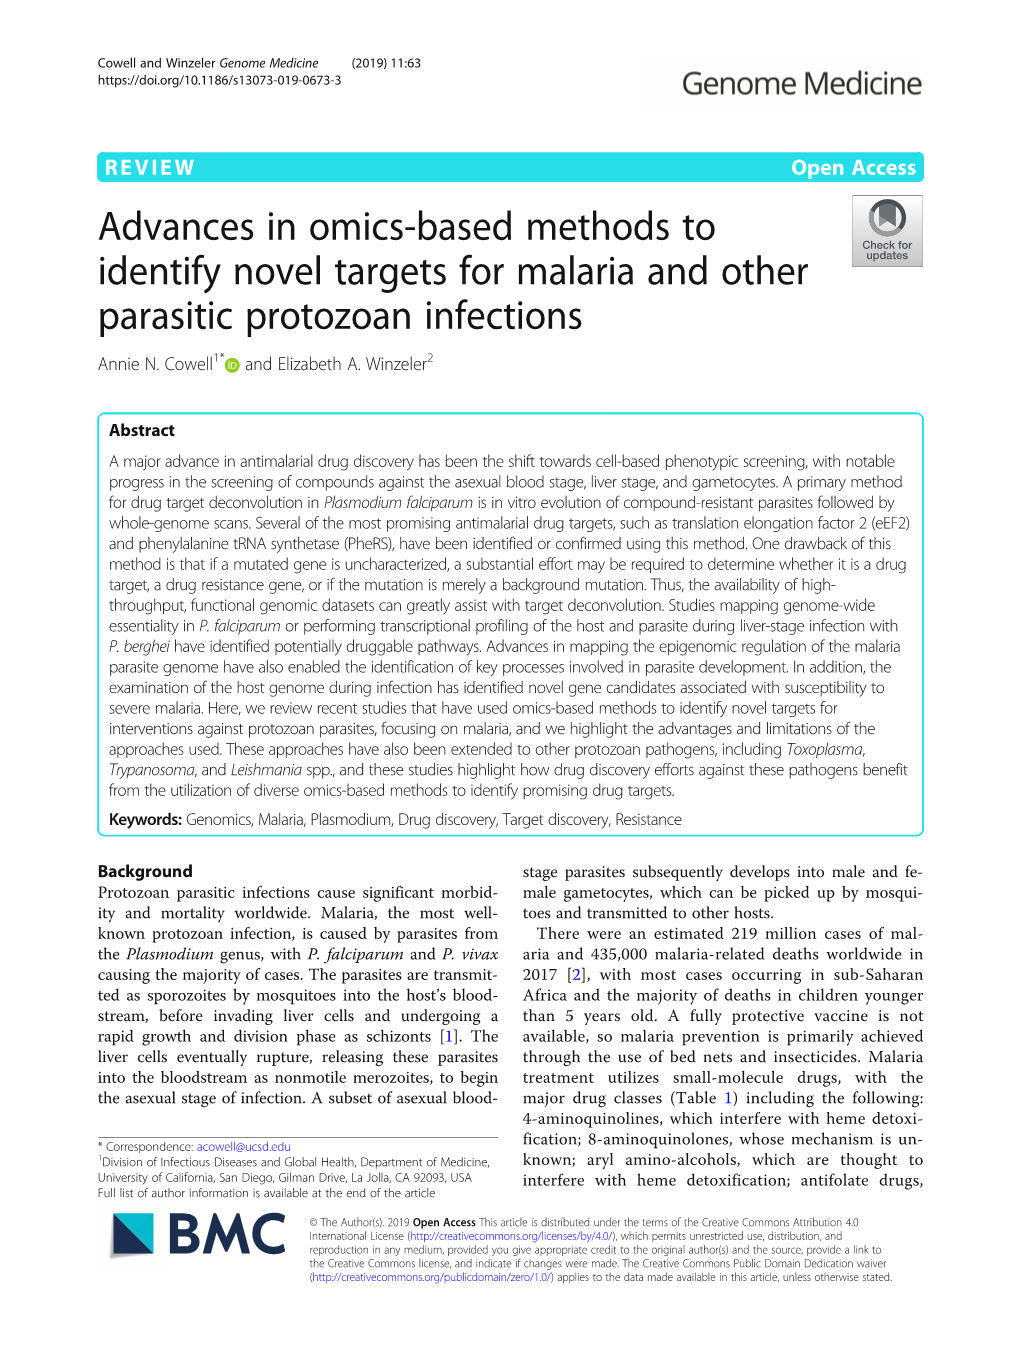 Advances in Omics-Based Methods to Identify Novel Targets for Malaria and Other Parasitic Protozoan Infections Annie N